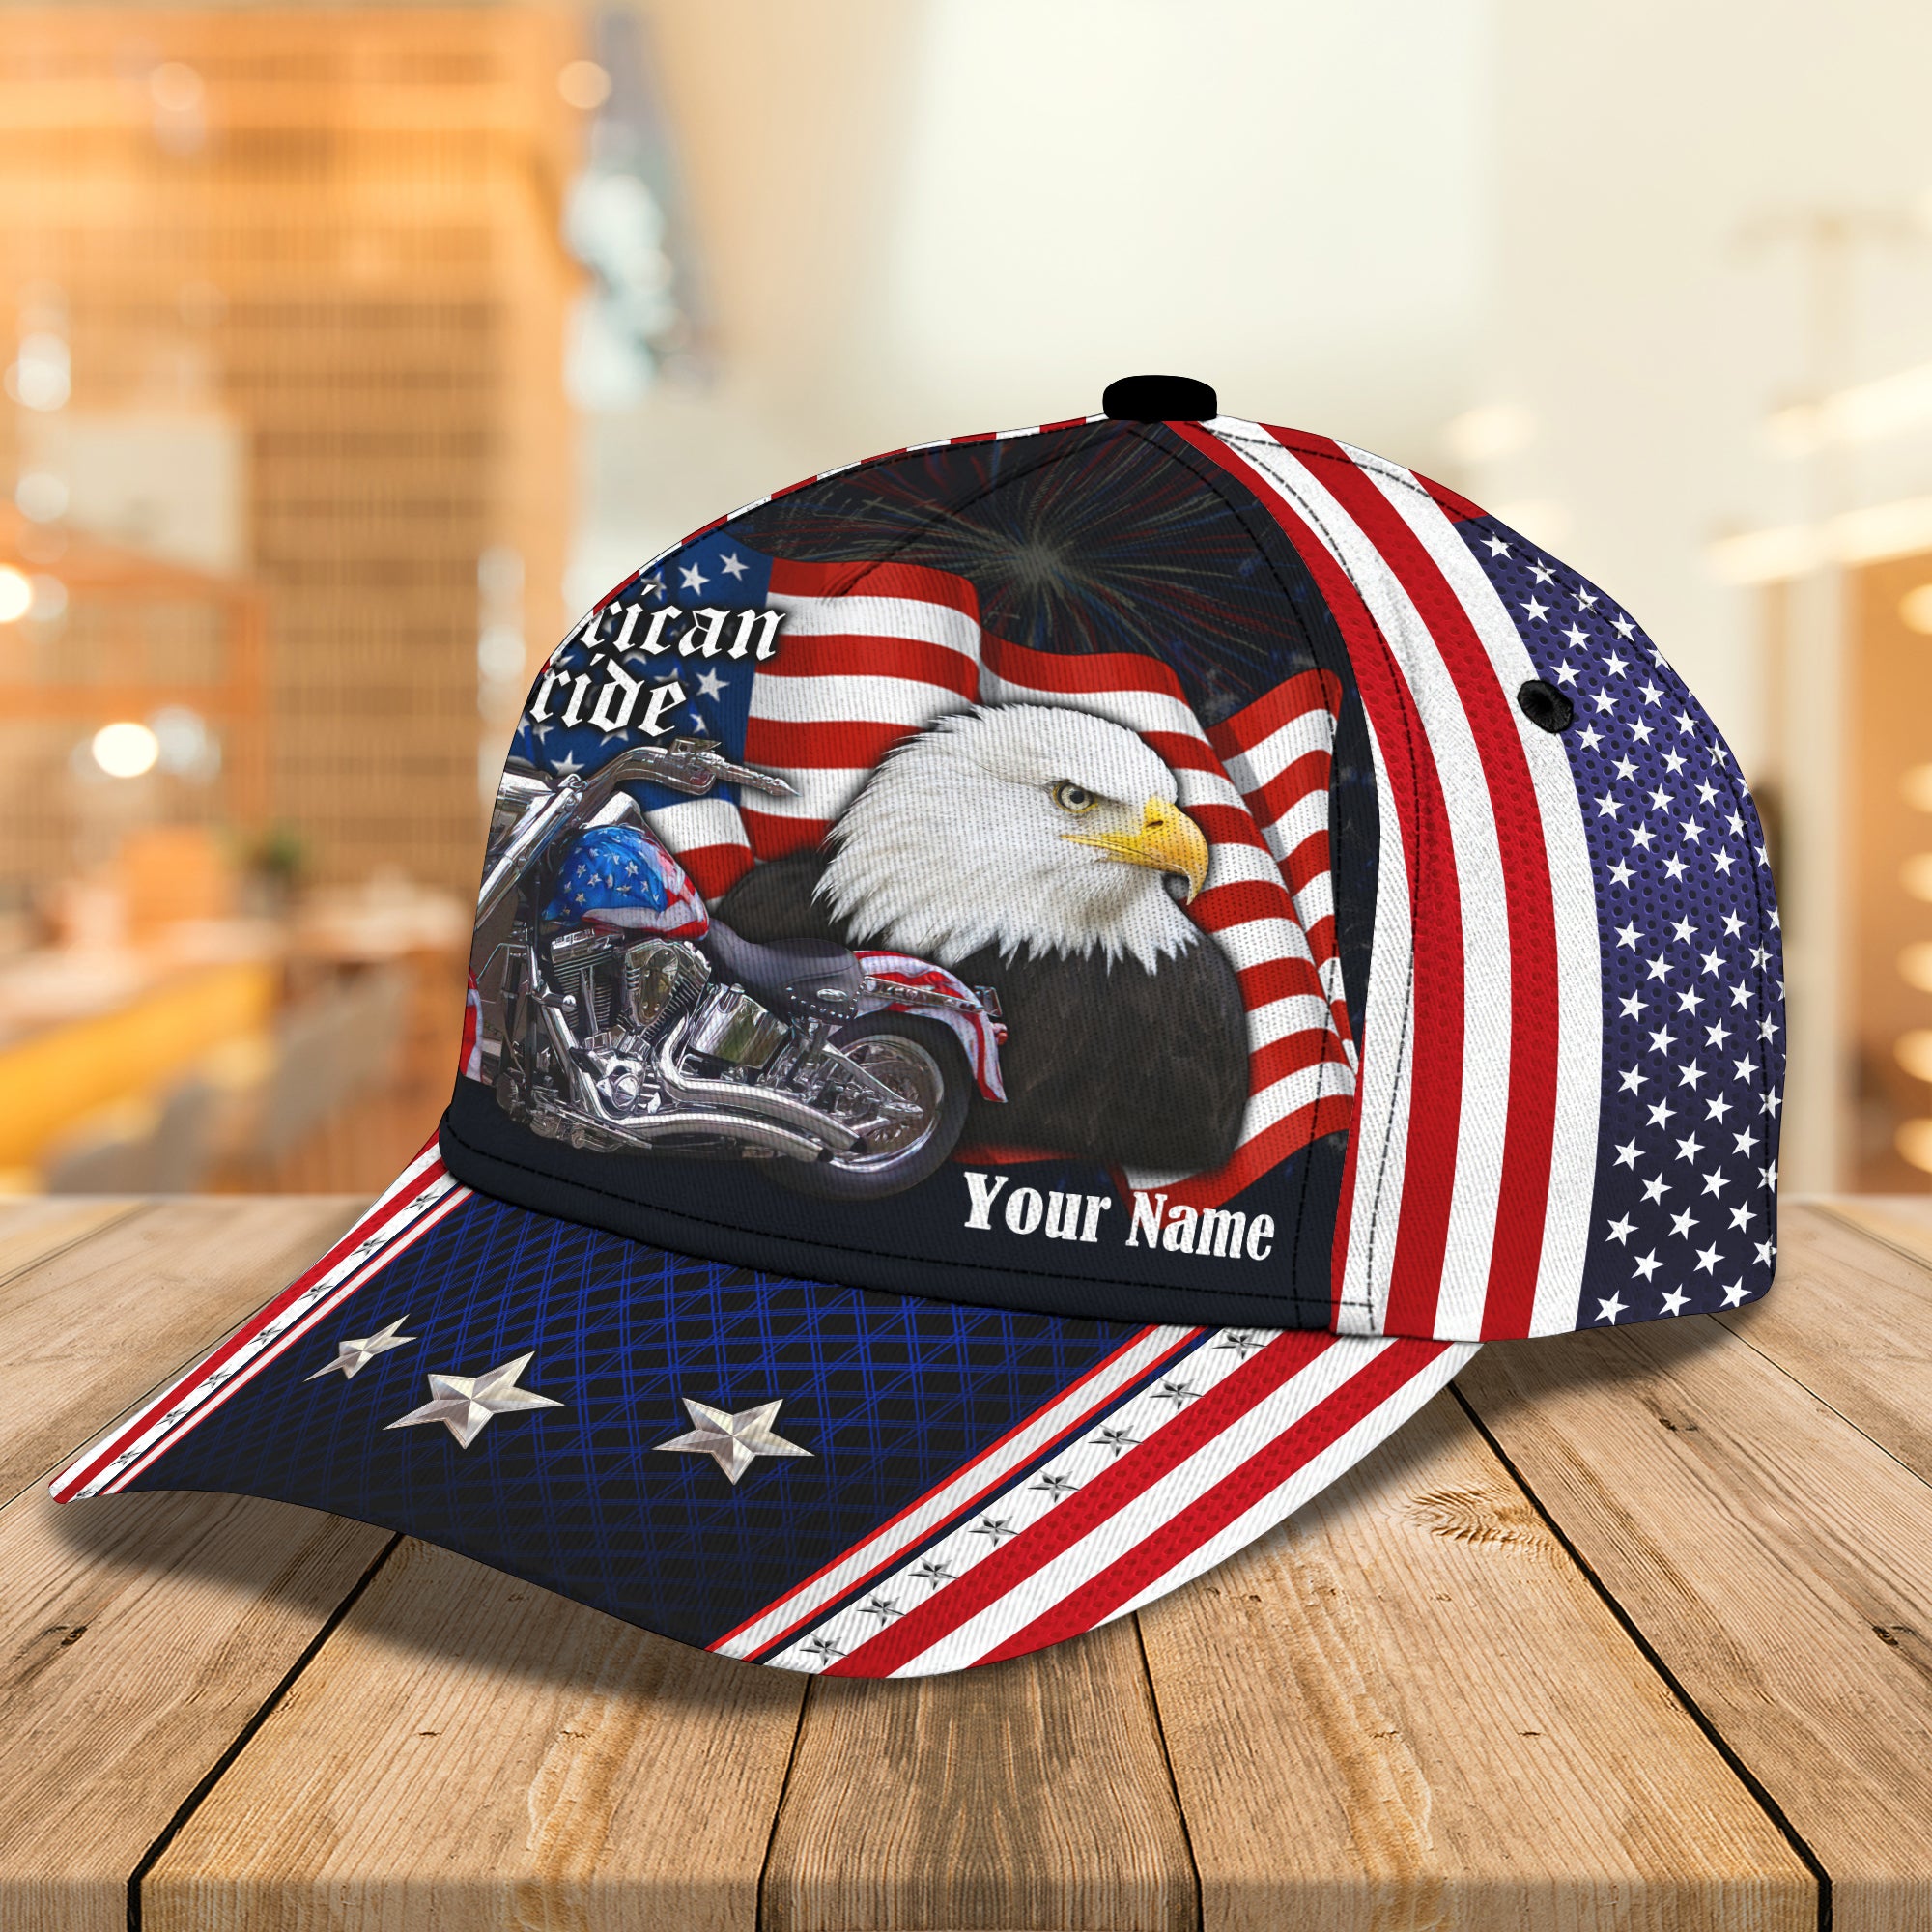 EAGLE CAP2 - Personalized Cap - BY97